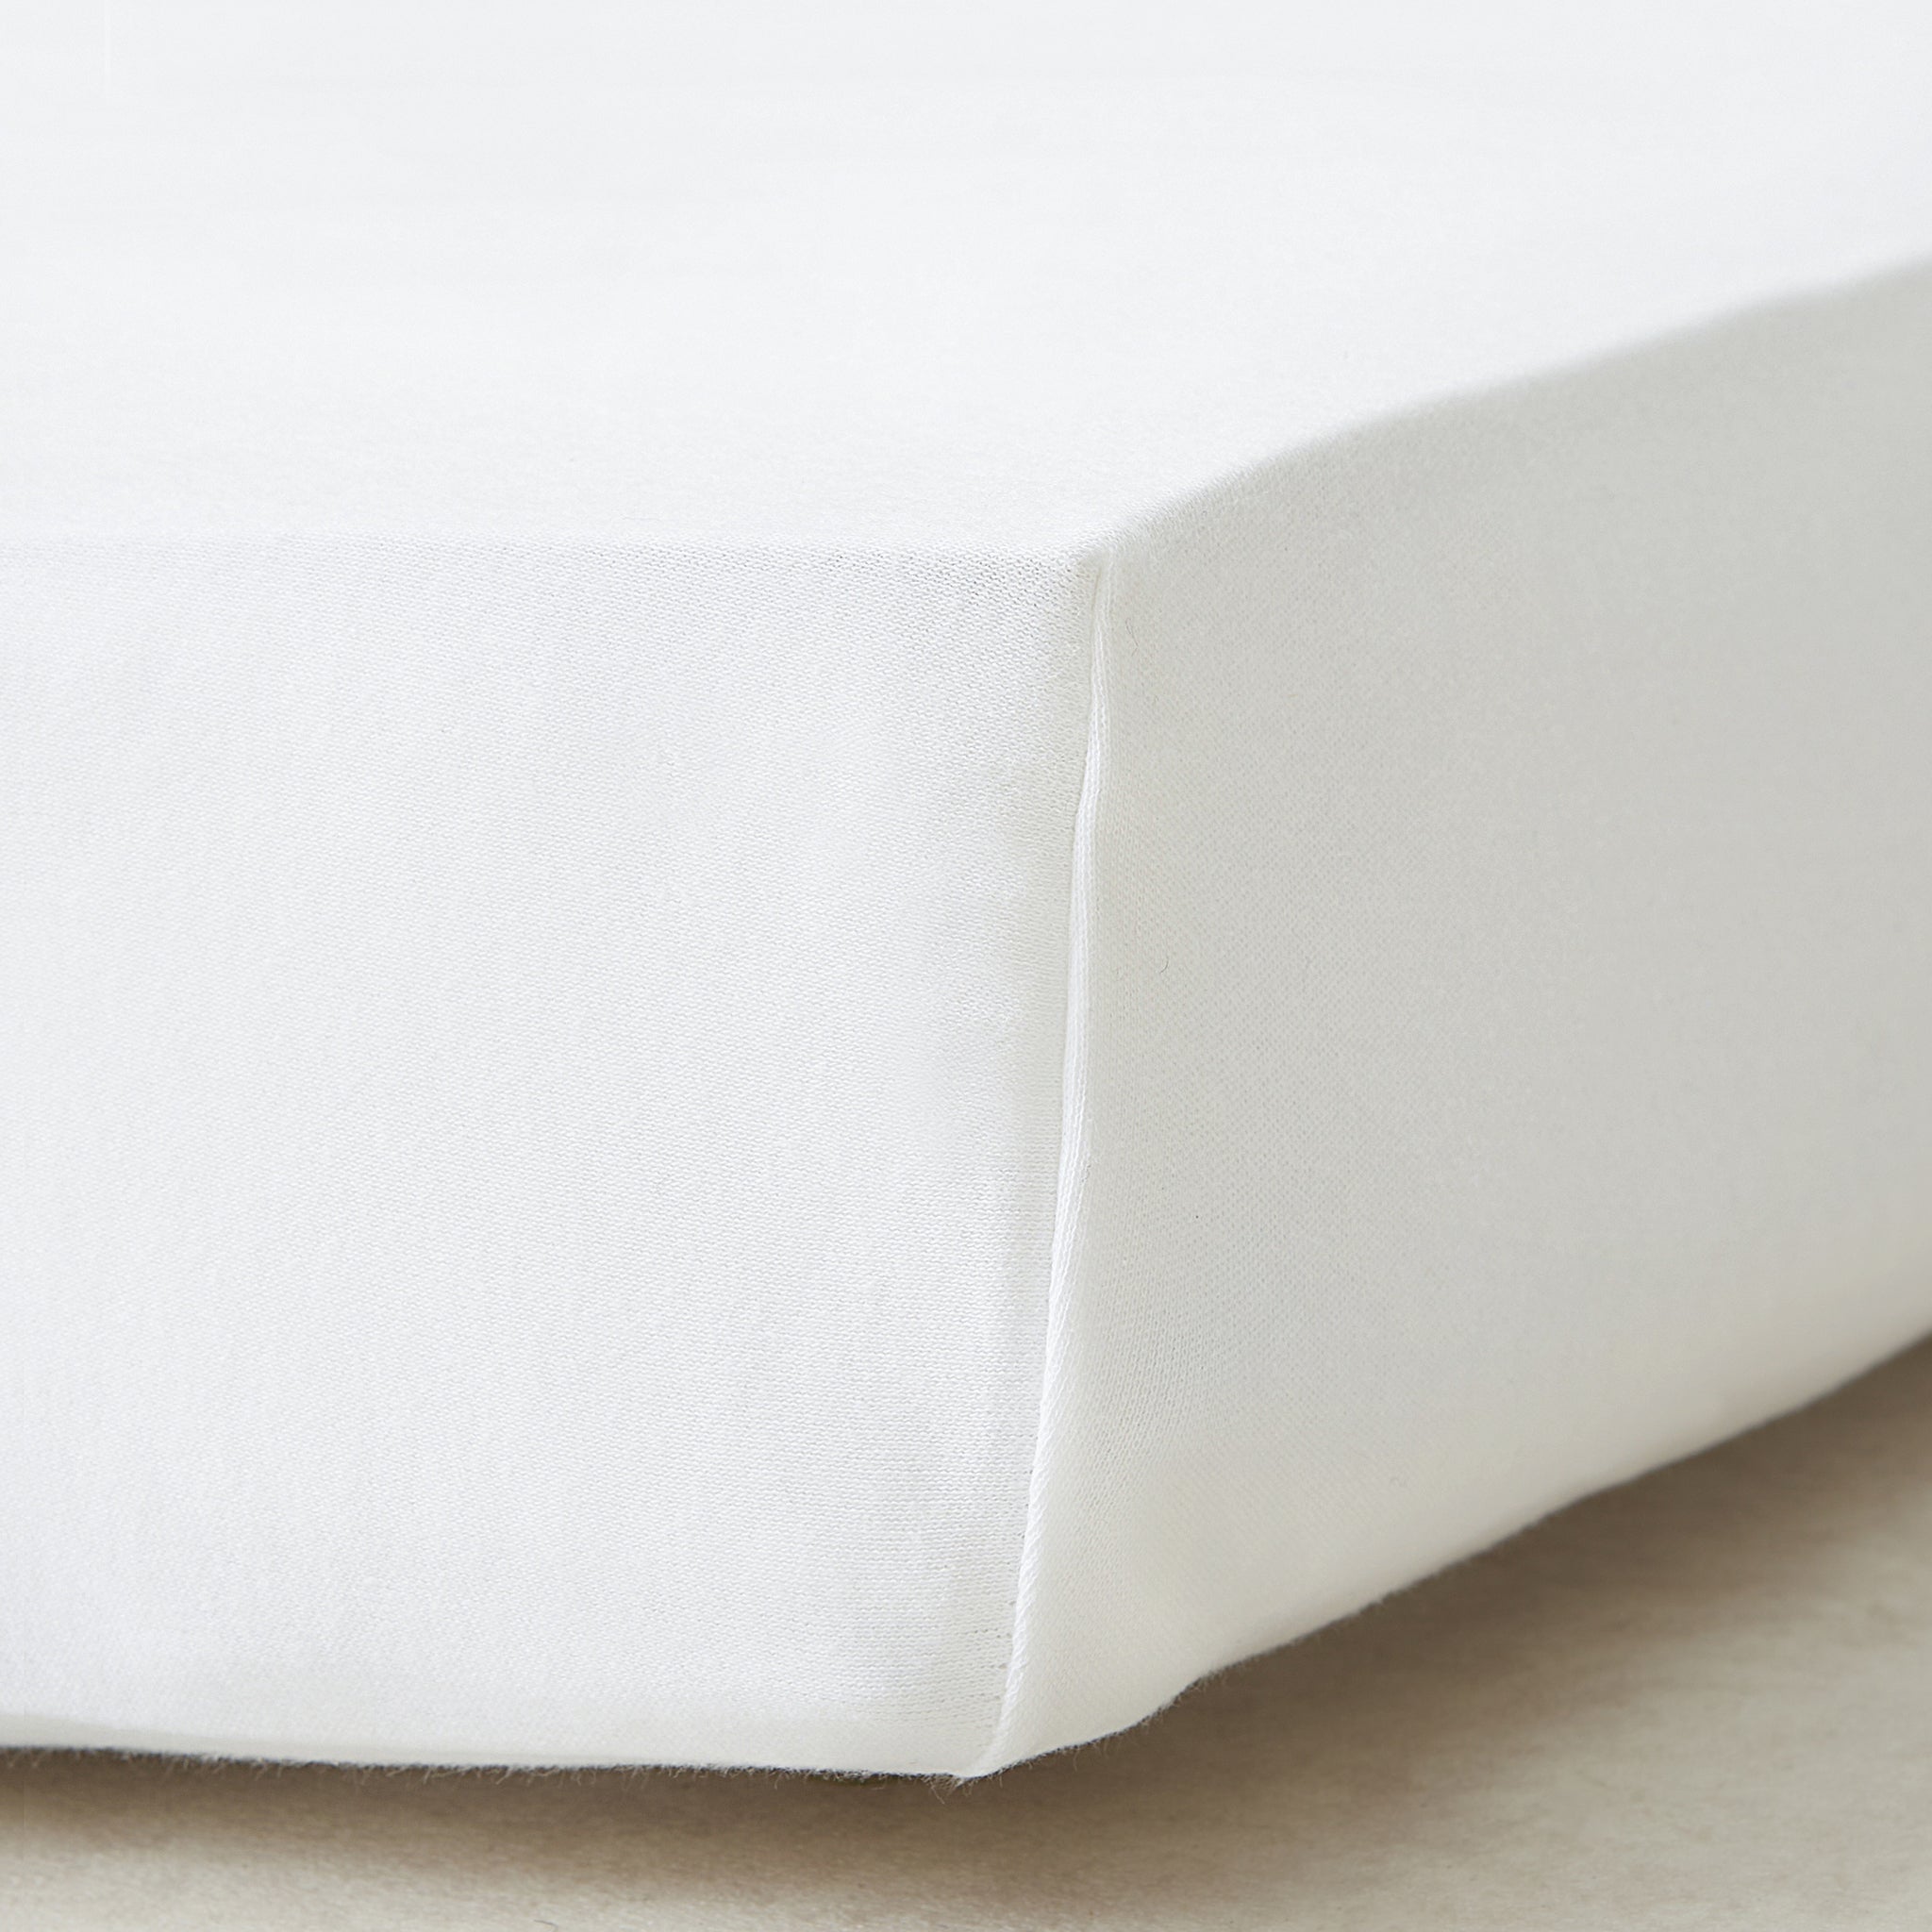 Design Your Own Certified Organic Bed Sheets - Any Shape, Any Size! - The Tiny Bed Company™